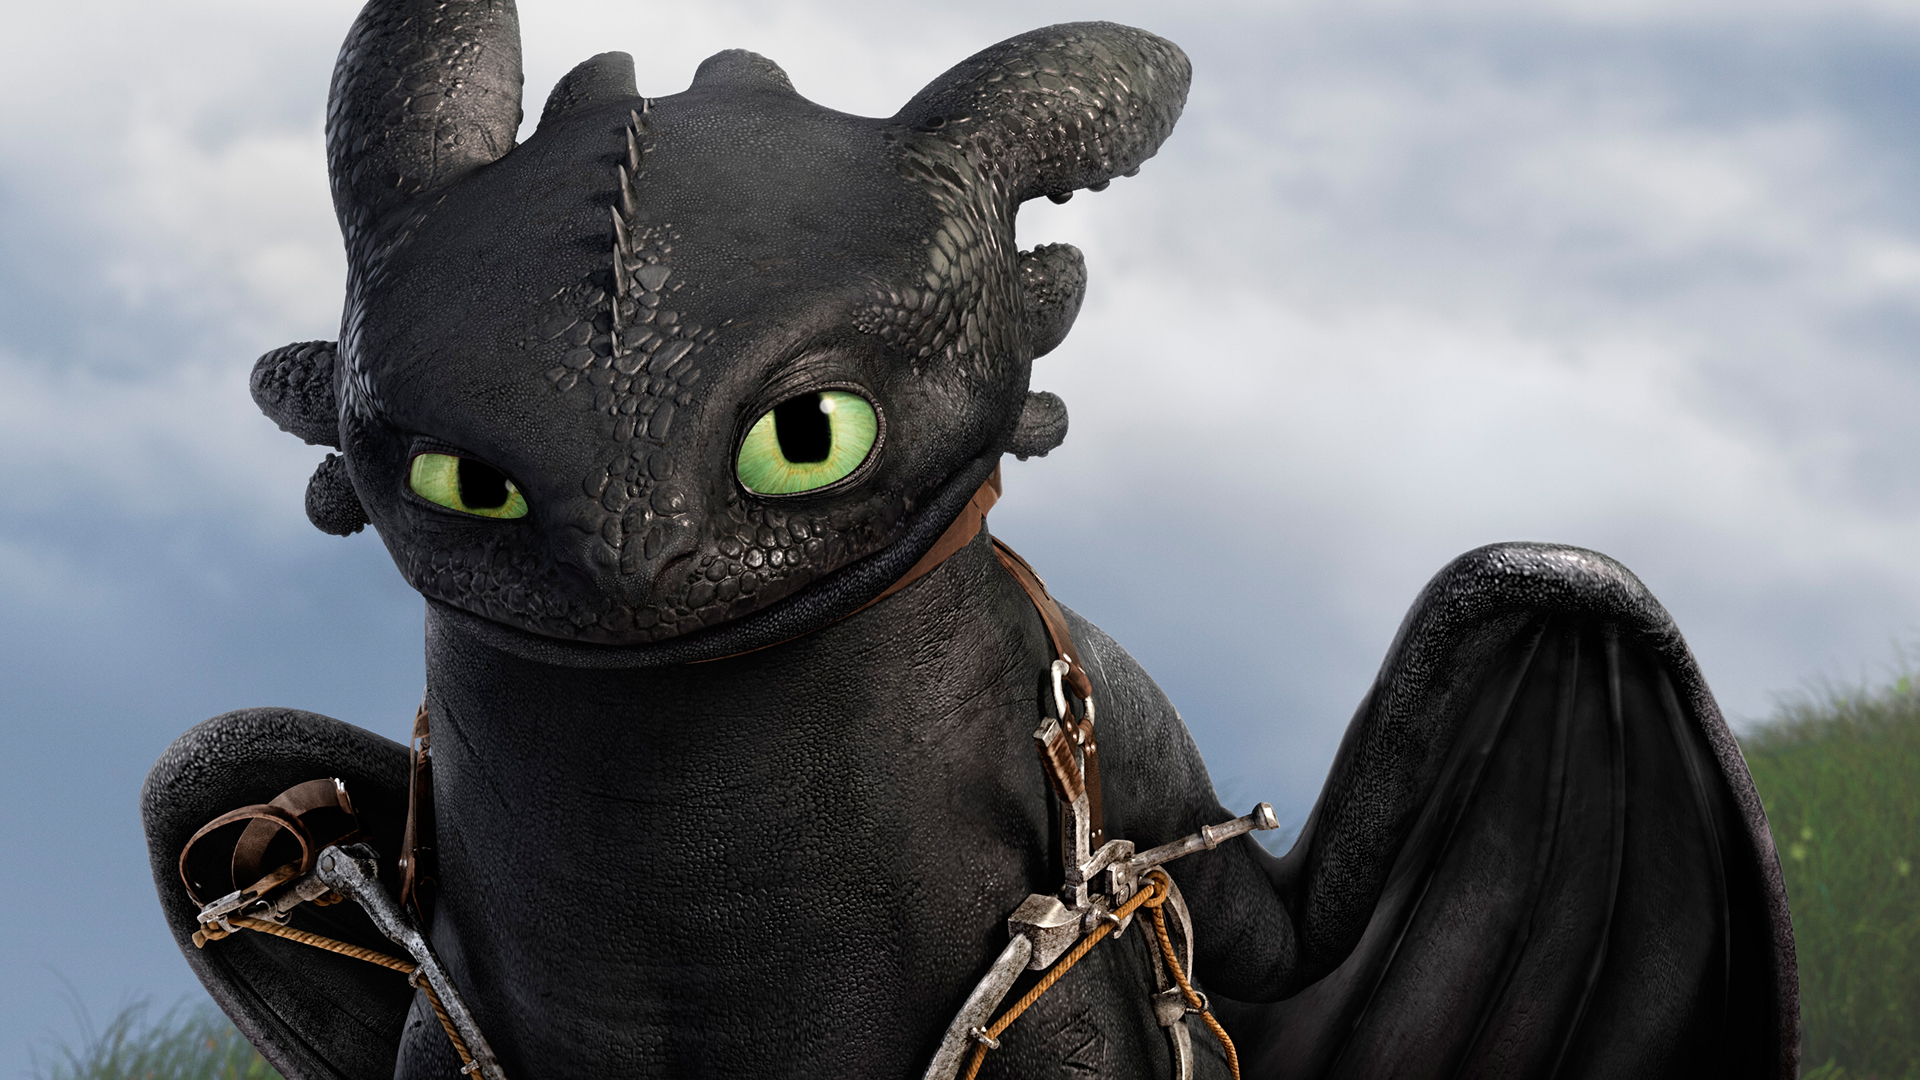 Toothless How To Train Your Dragon 0x Wallpaper HD